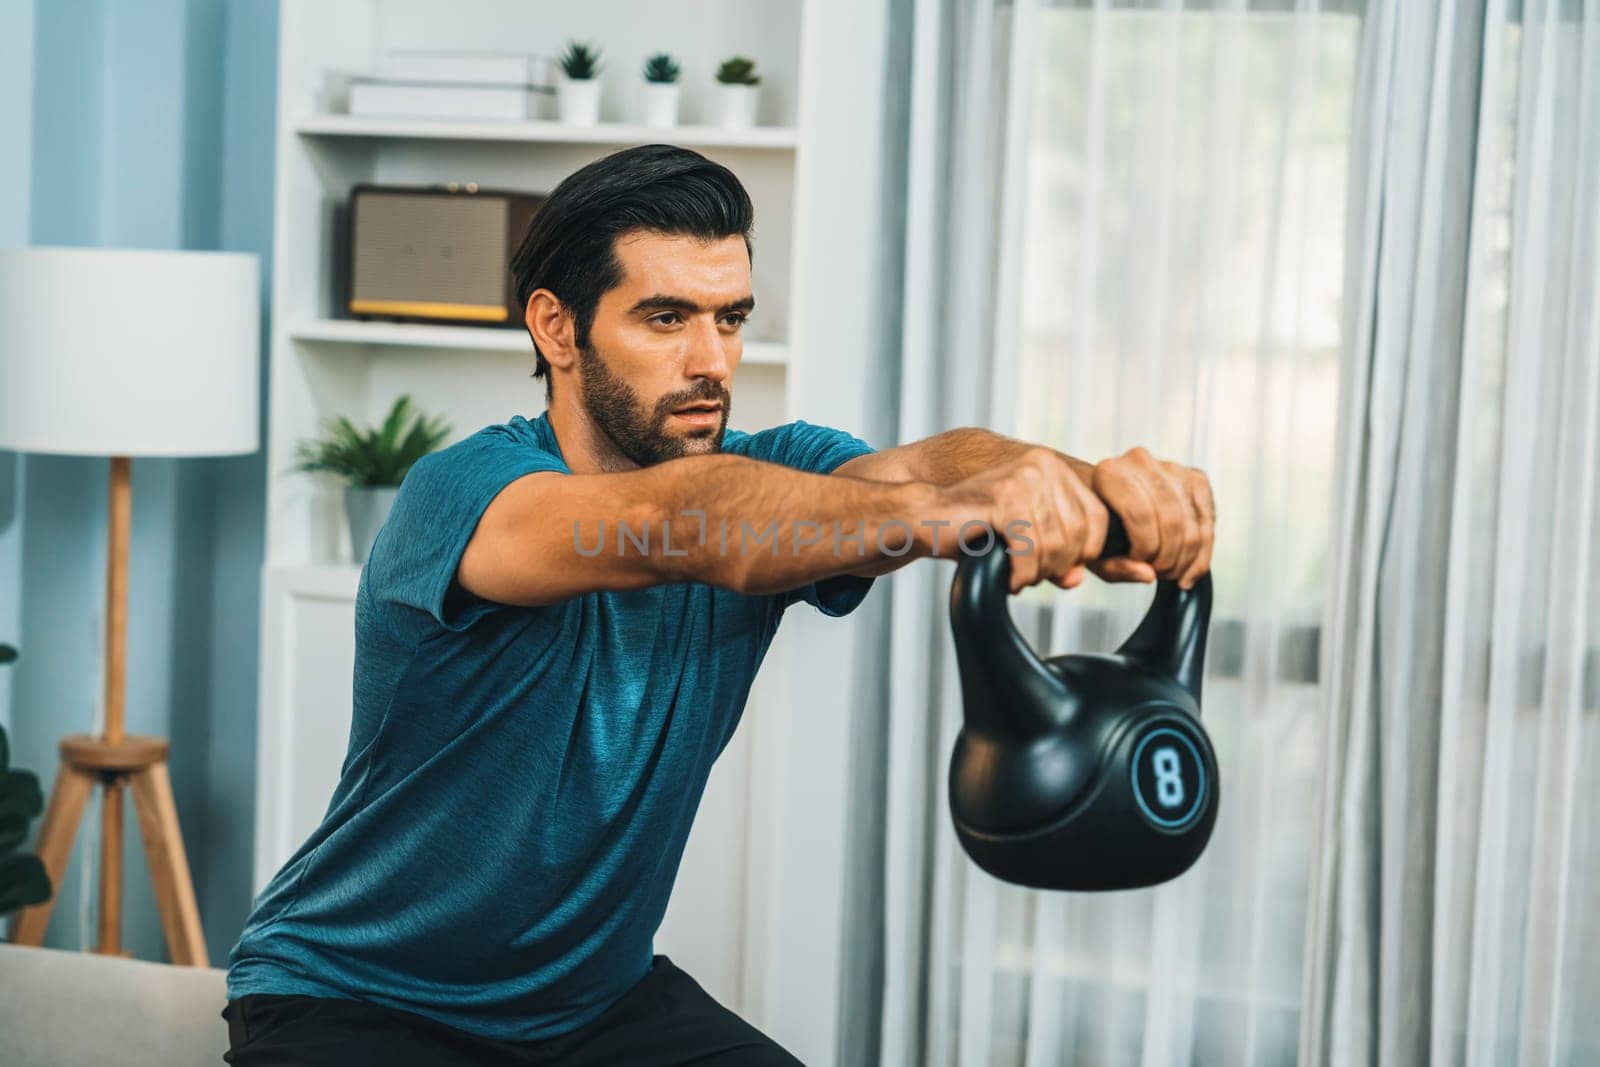 Athletic body and active sporty man doing squat with kettlebell weight for effective targeting muscle gain at gaiety home as concept of healthy fit body home workout lifestyle.